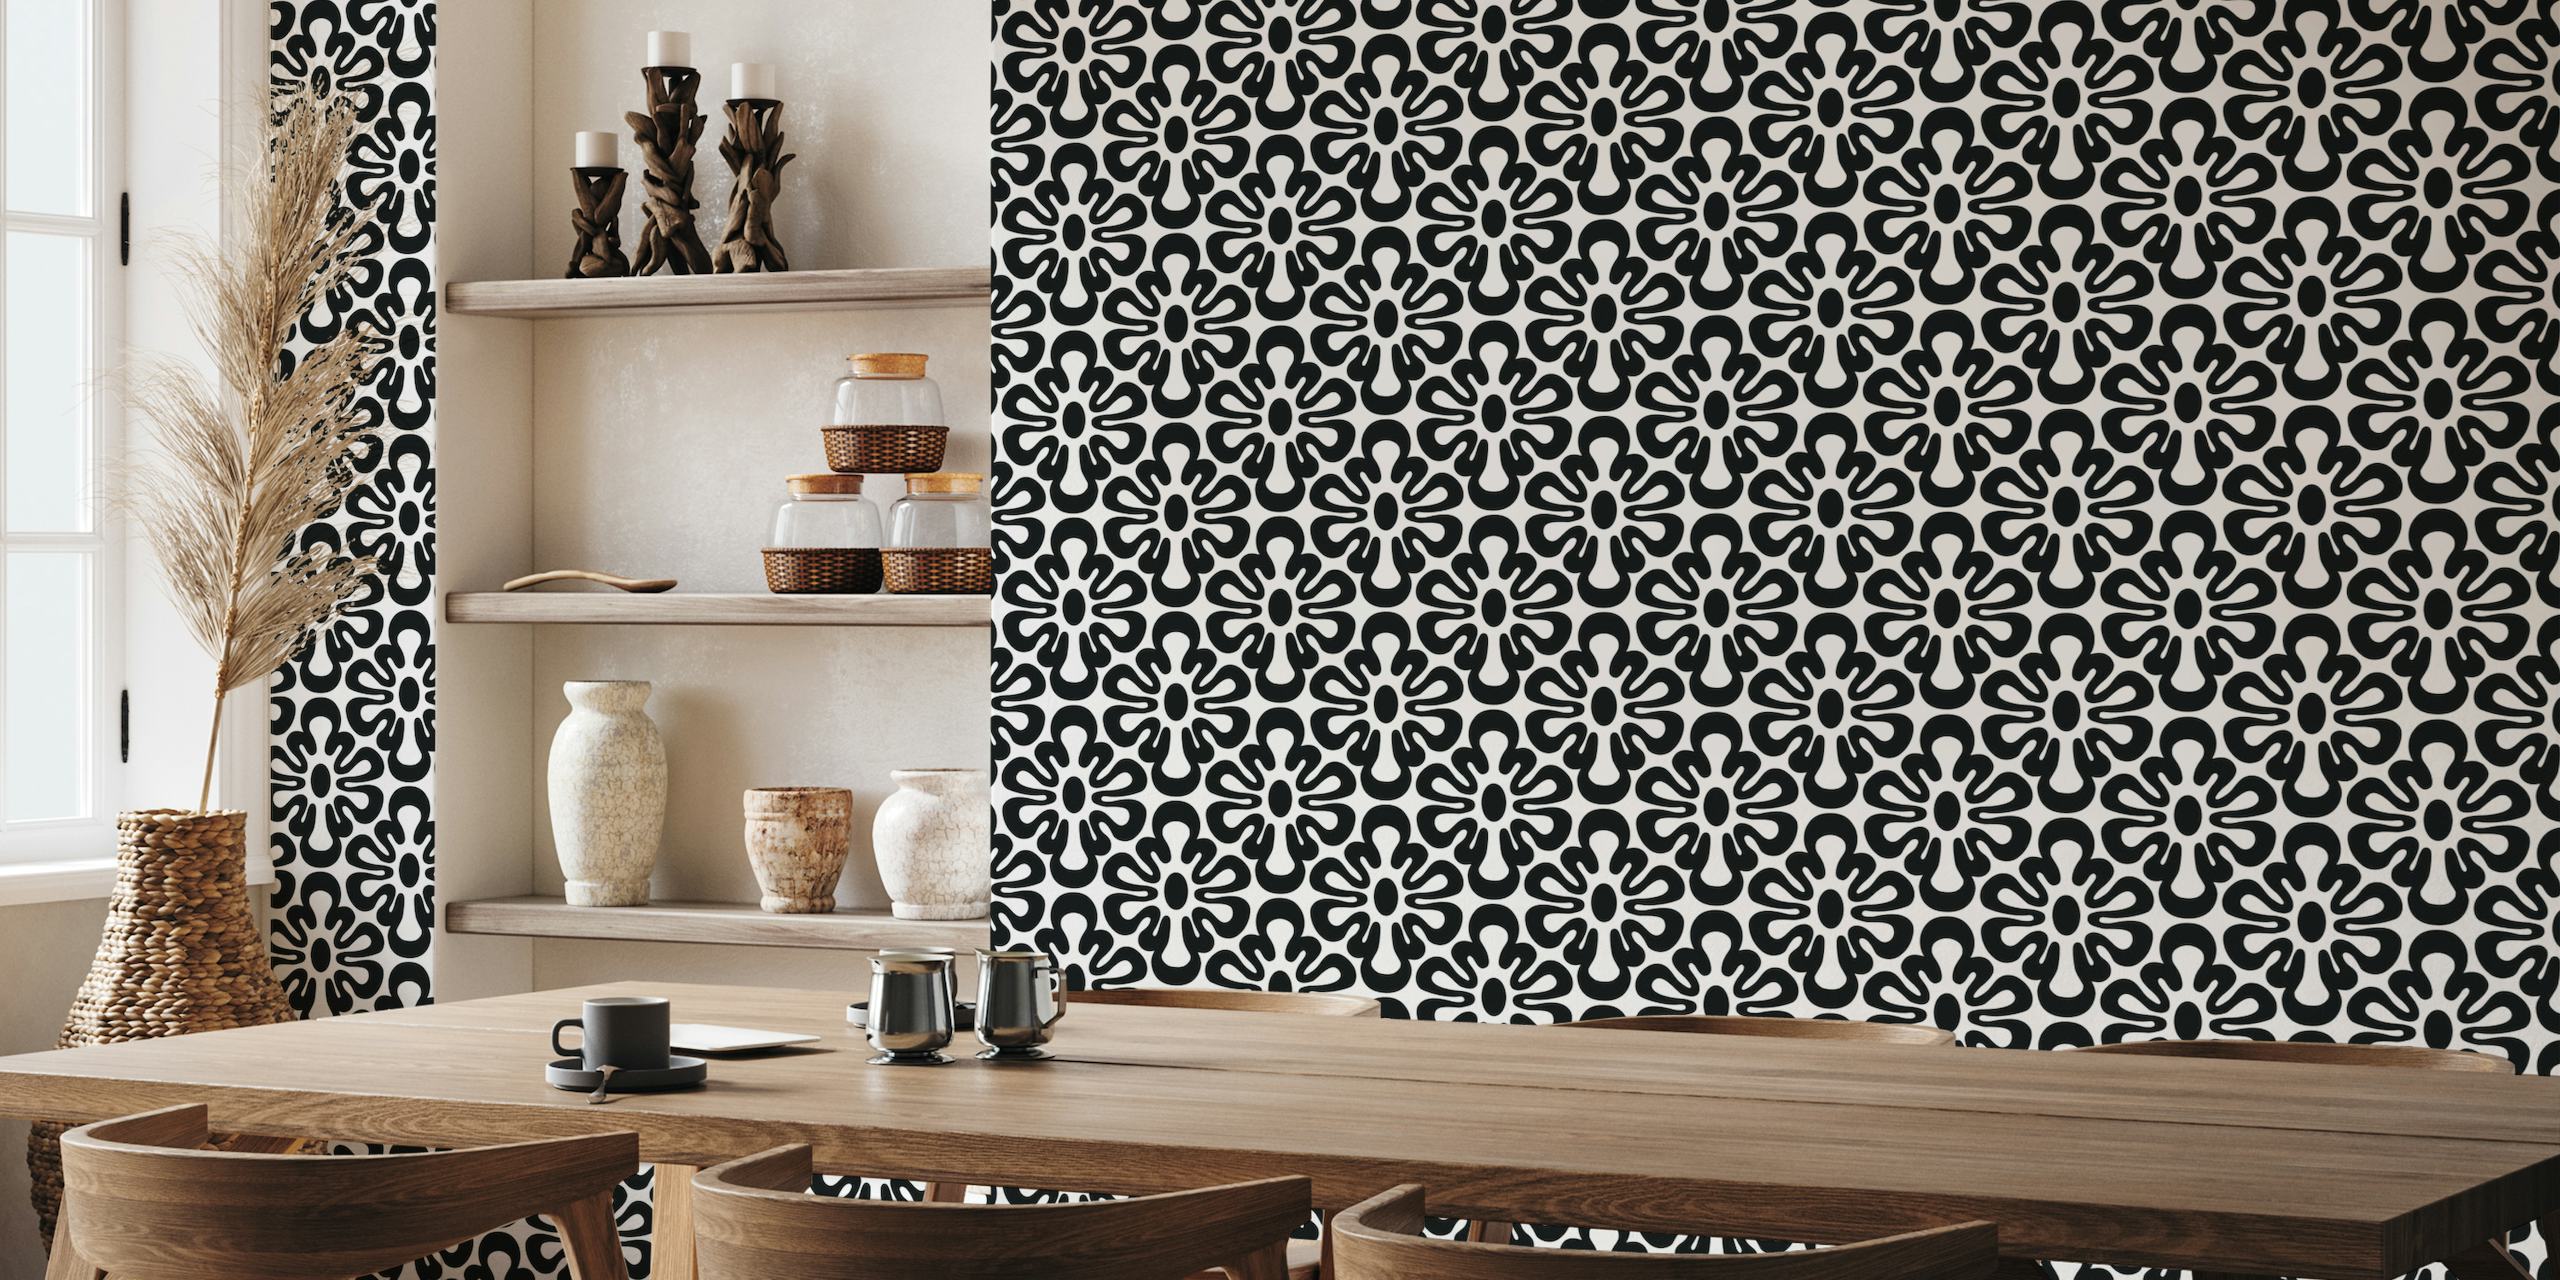 2625 D - abstract shapes pattern, black and white tapete